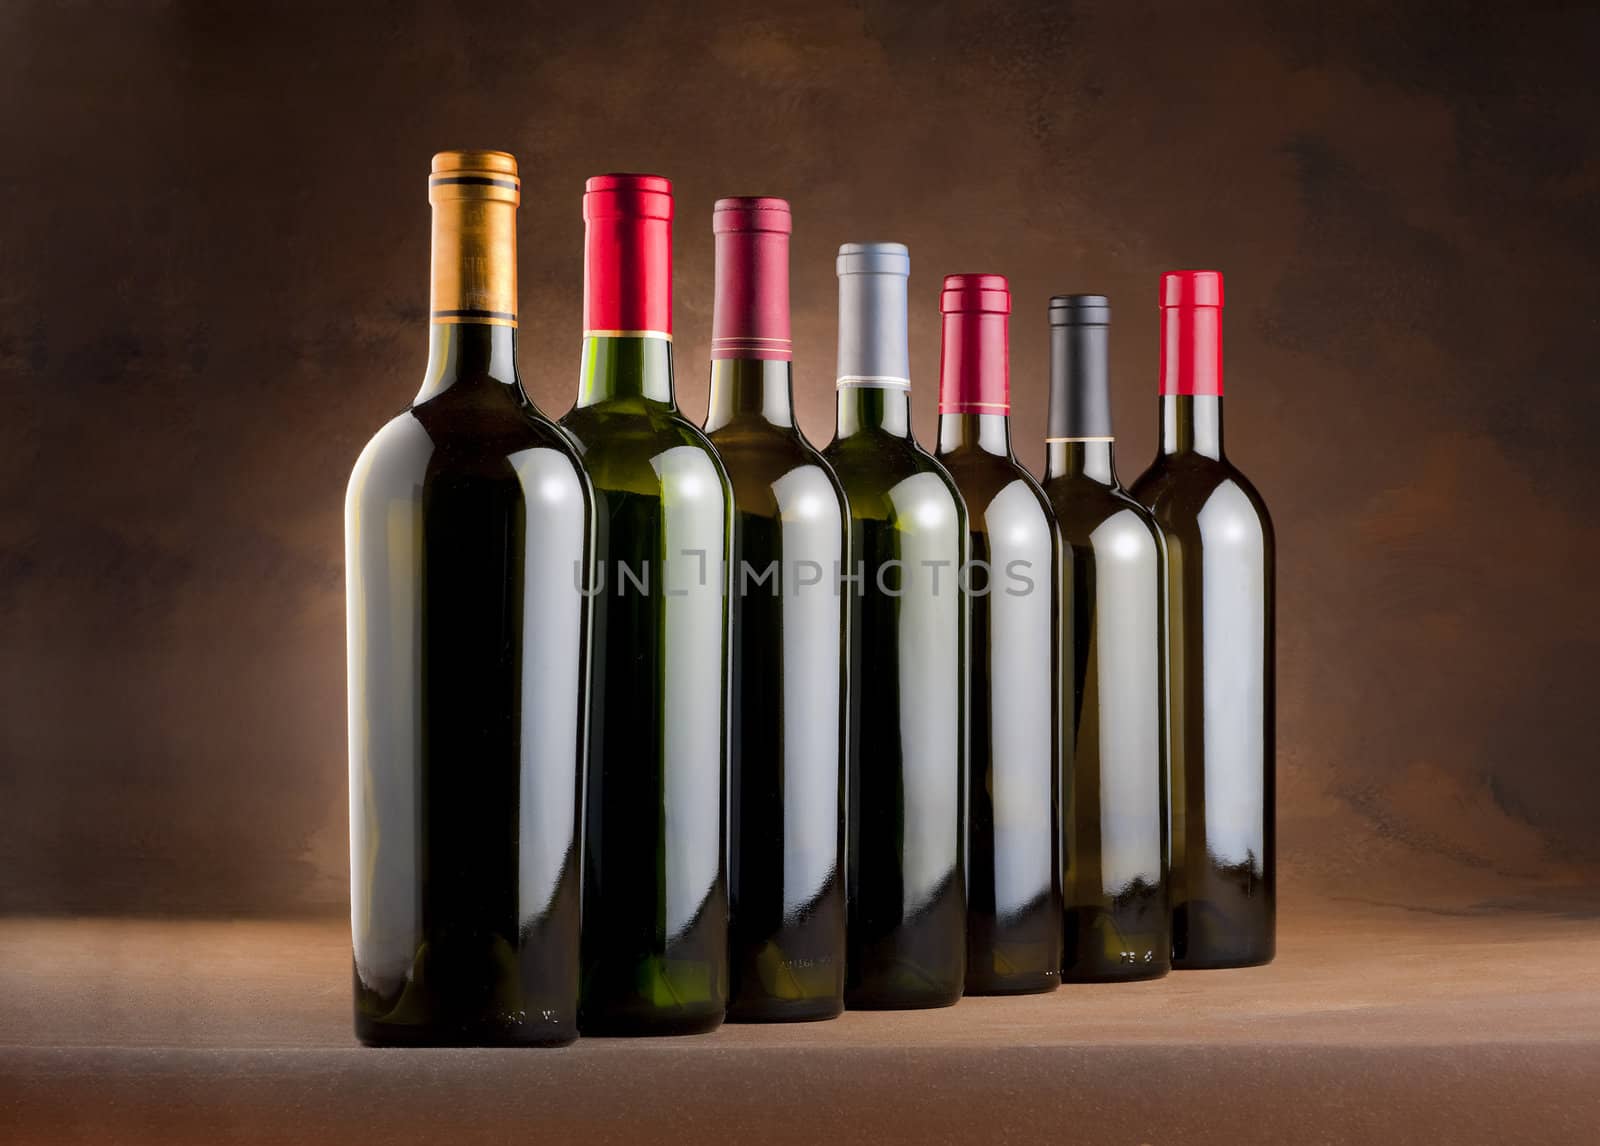 Red wine bottles lined up in a row by f/2sumicron